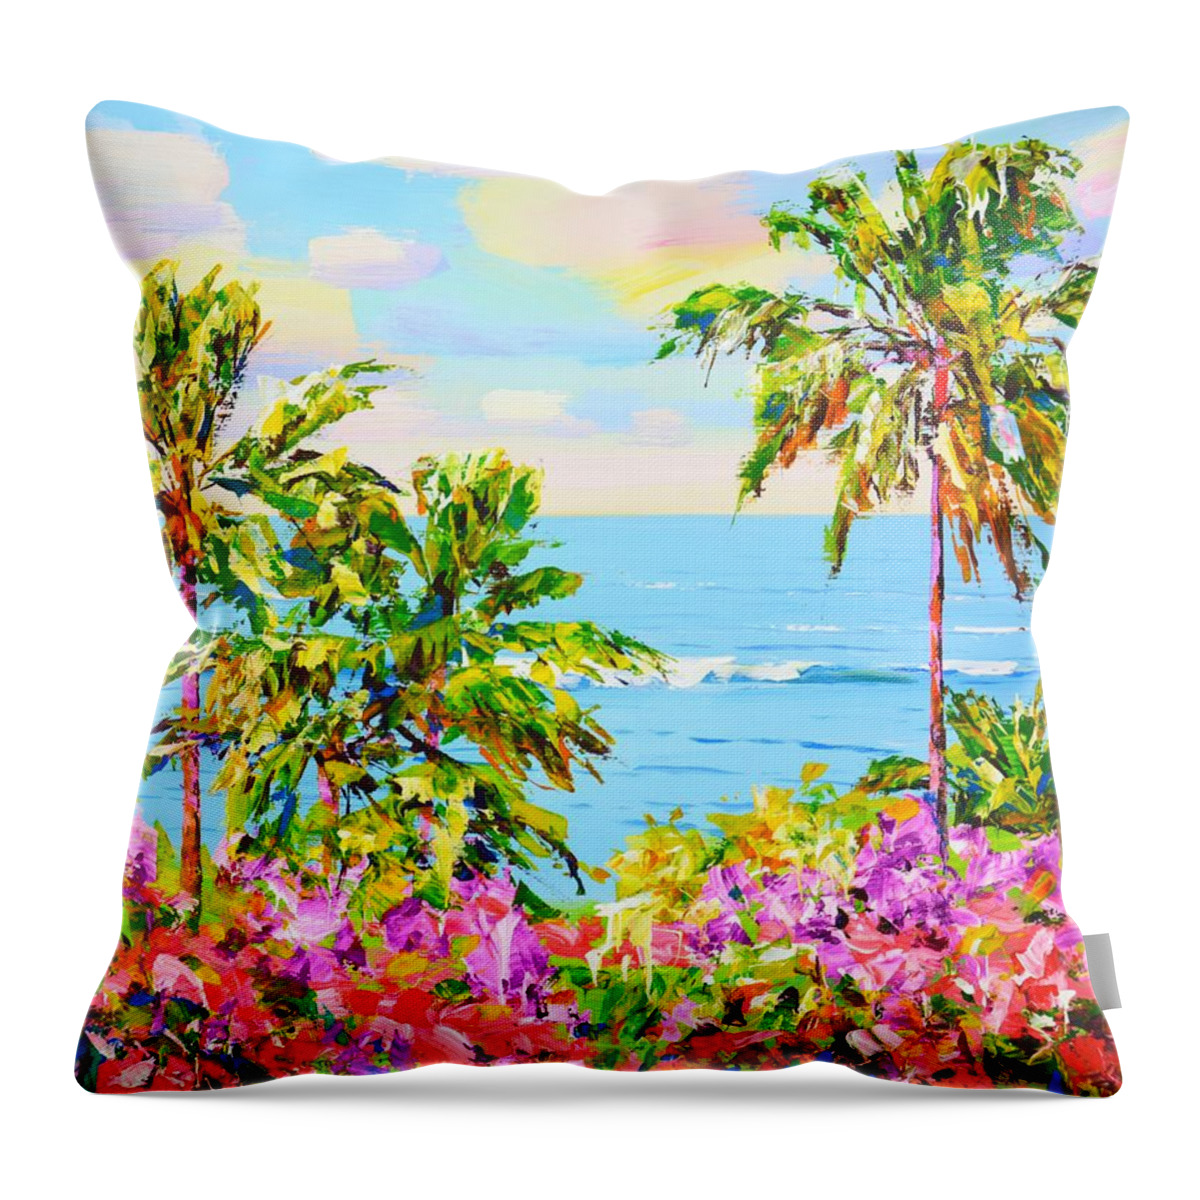 Ocean Throw Pillow featuring the painting 	Palms. Ocean. Flowers. by Iryna Kastsova